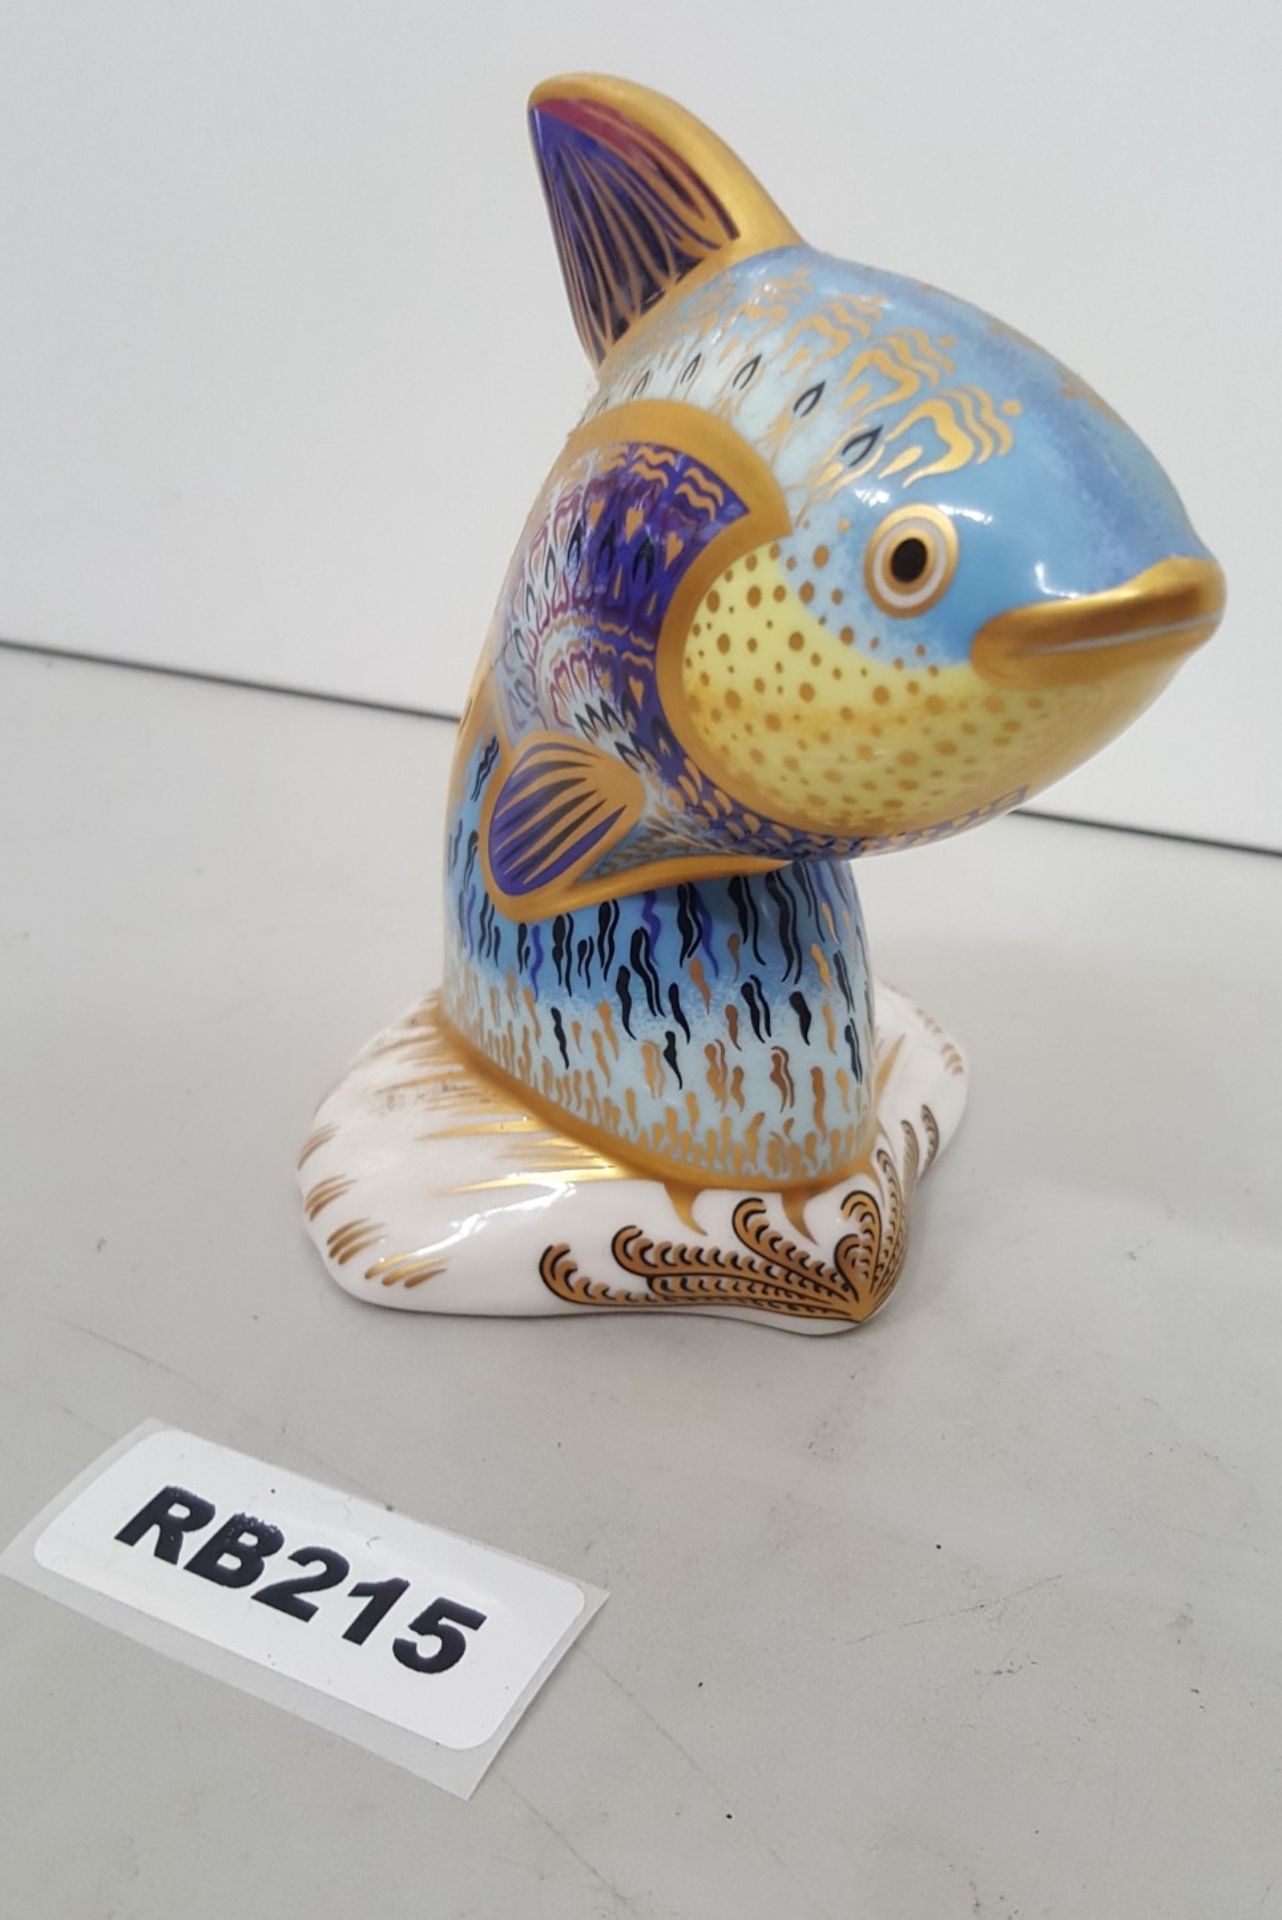 1 x COLLECTIBLE ROYAL CROWN DERBY GUPPY FISH LIMITED EDITION FIGURINE - Ref RB215 I - Image 4 of 5